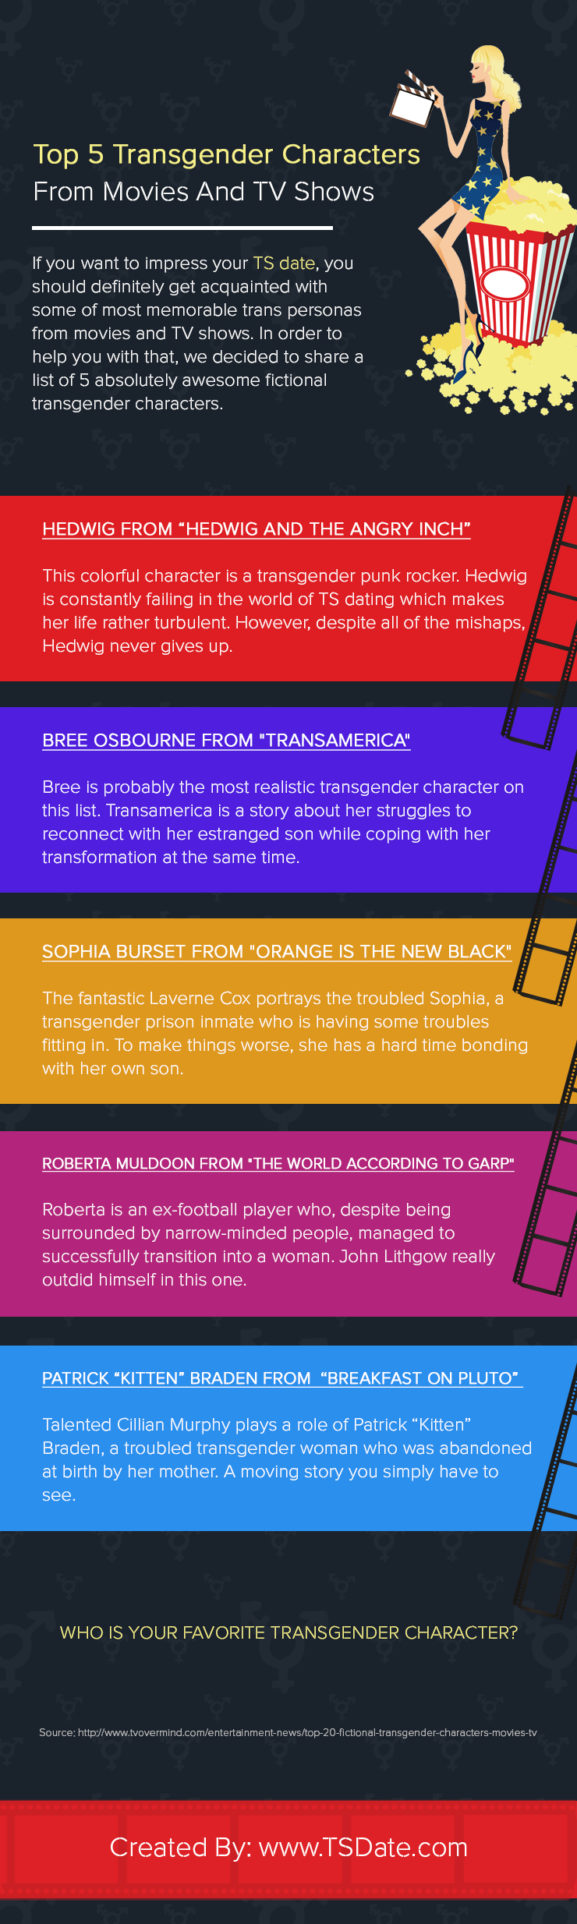 Top 5 Transgender Characters From Movies And TV Shows